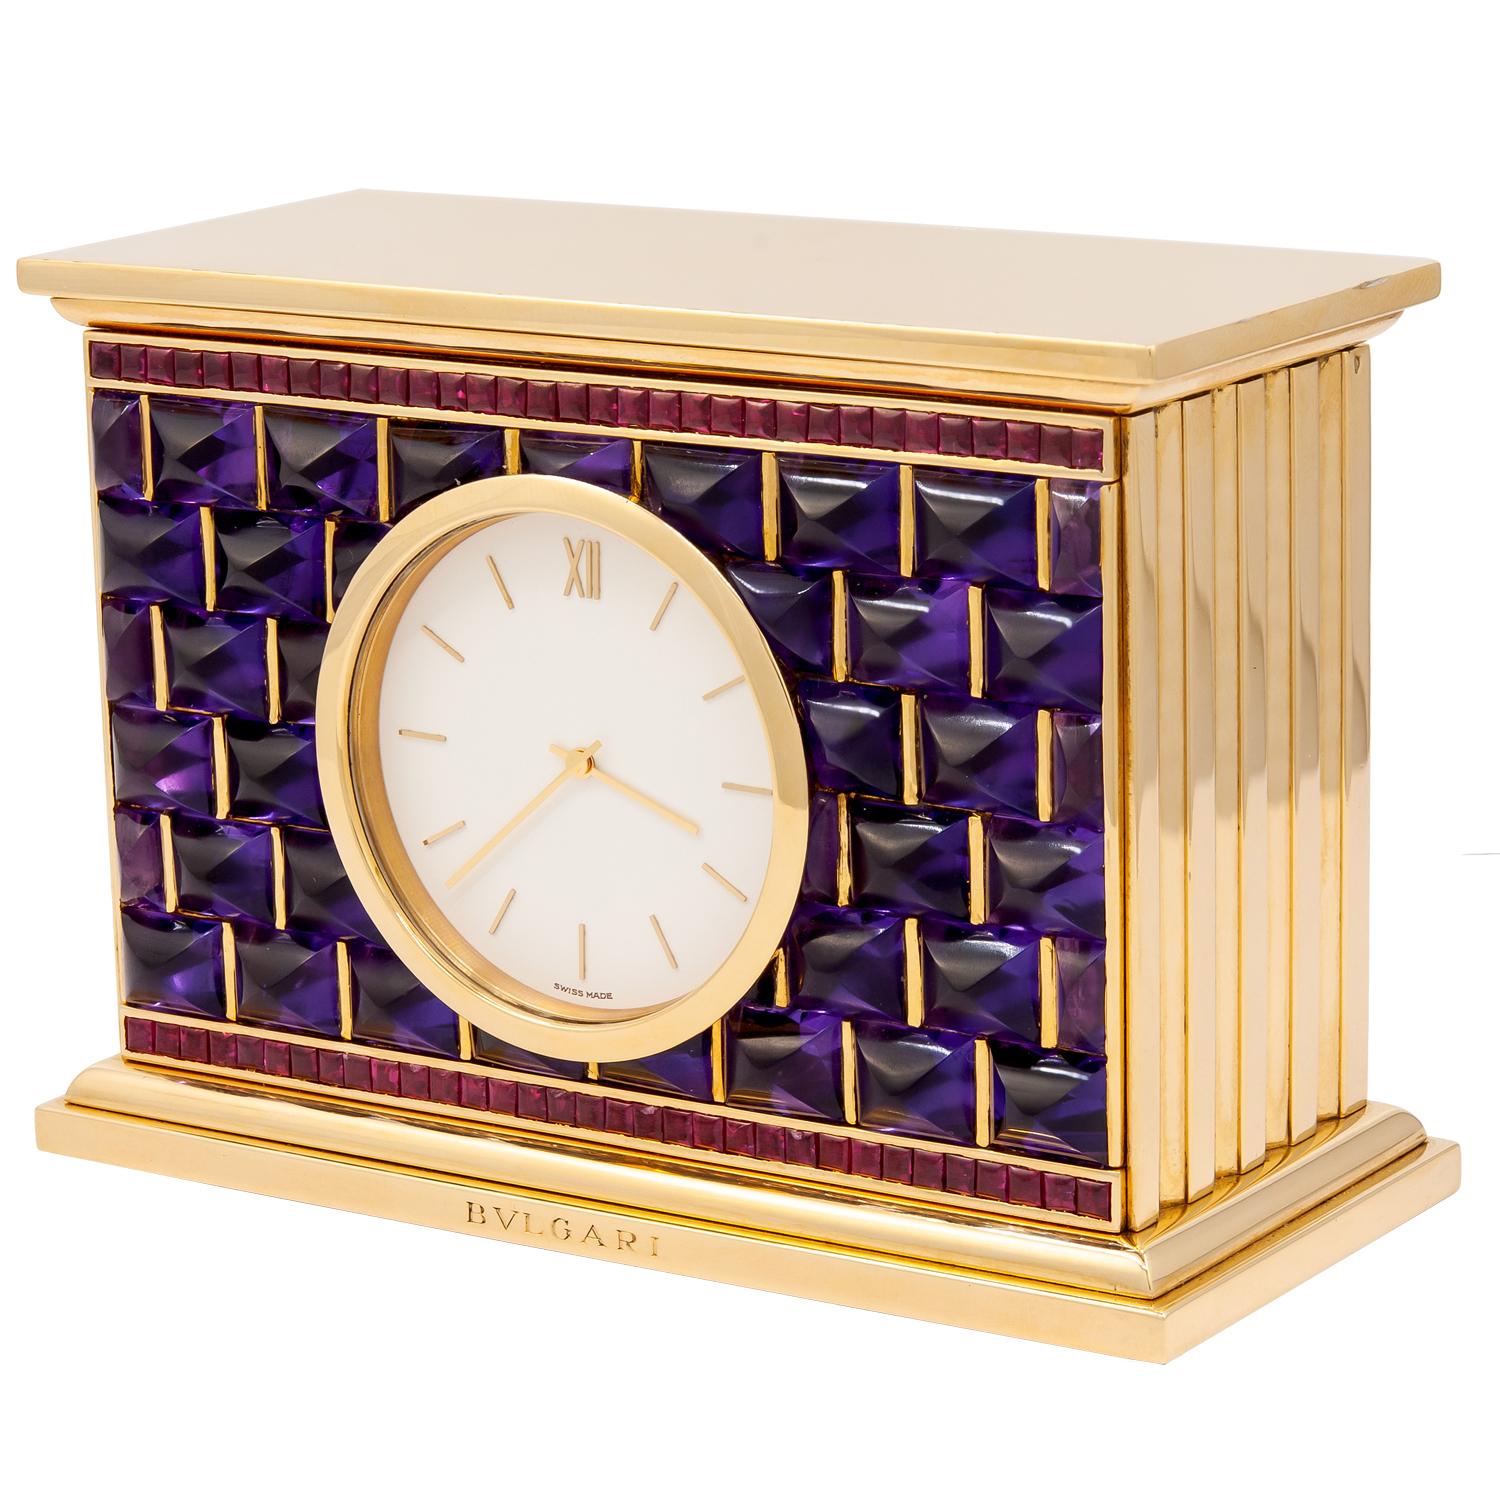 Bulgari Rome 1980s Cabochon Amethyst Ruby 18Carat Gold Iconic Style Desk Clock
An 18k yellow gold quartz desk clock, set with  shaped amethyst bordered by rubies, signed Bvlgari.
measures approx.  3.5″ in length x 1.65″ in width x 2.5″ in